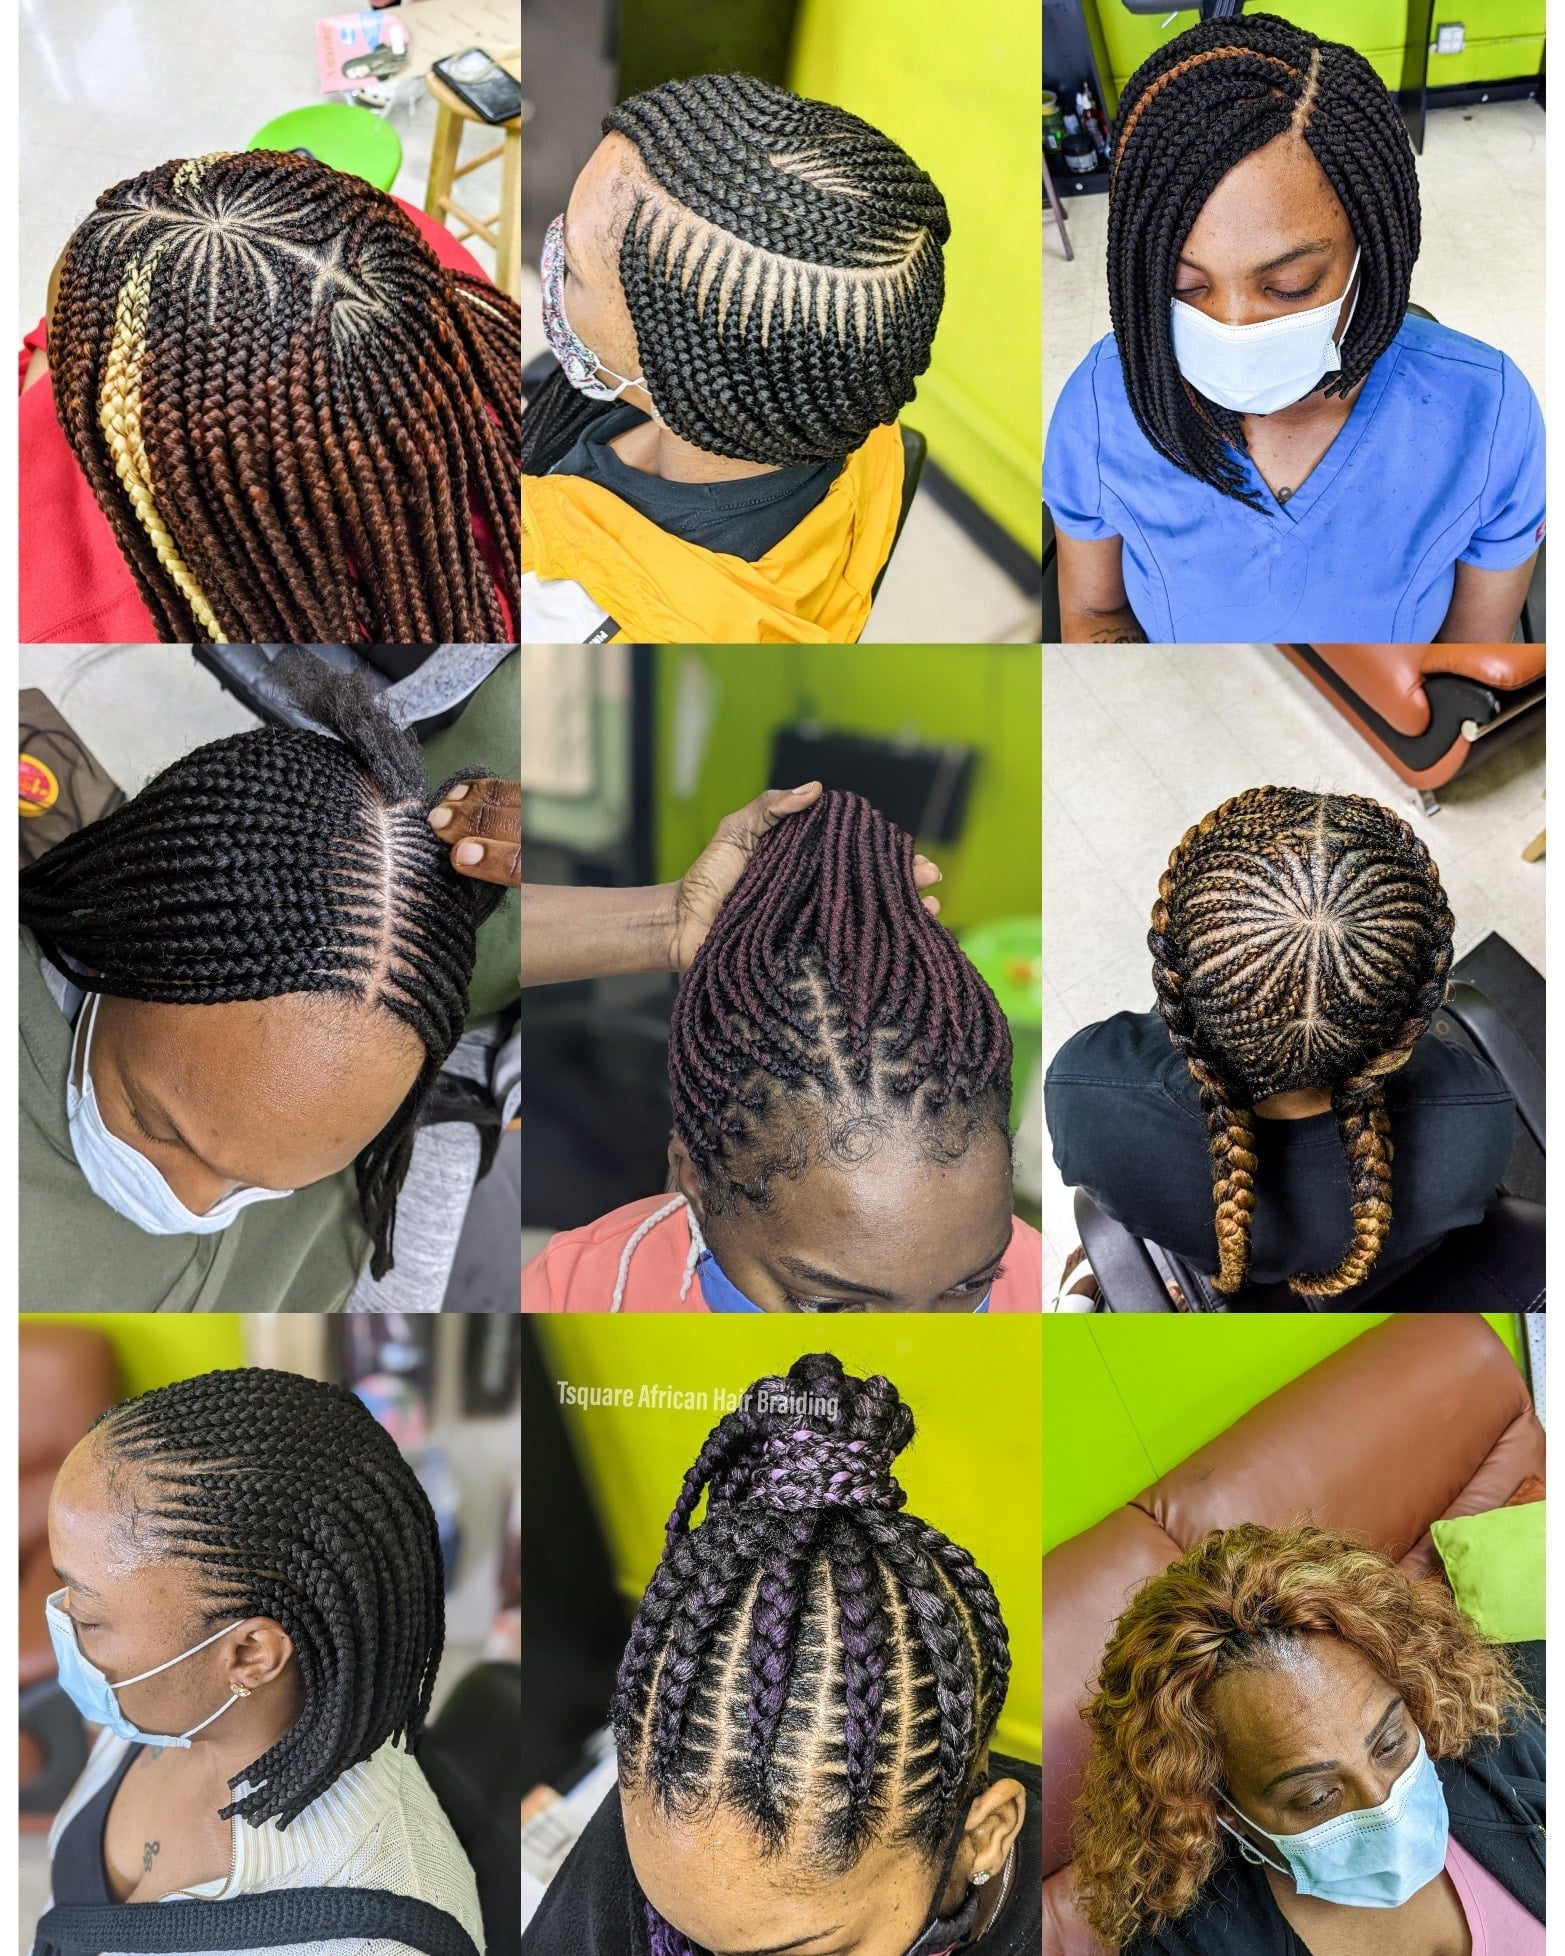 These hairstyles are amazing... Very protective and neat